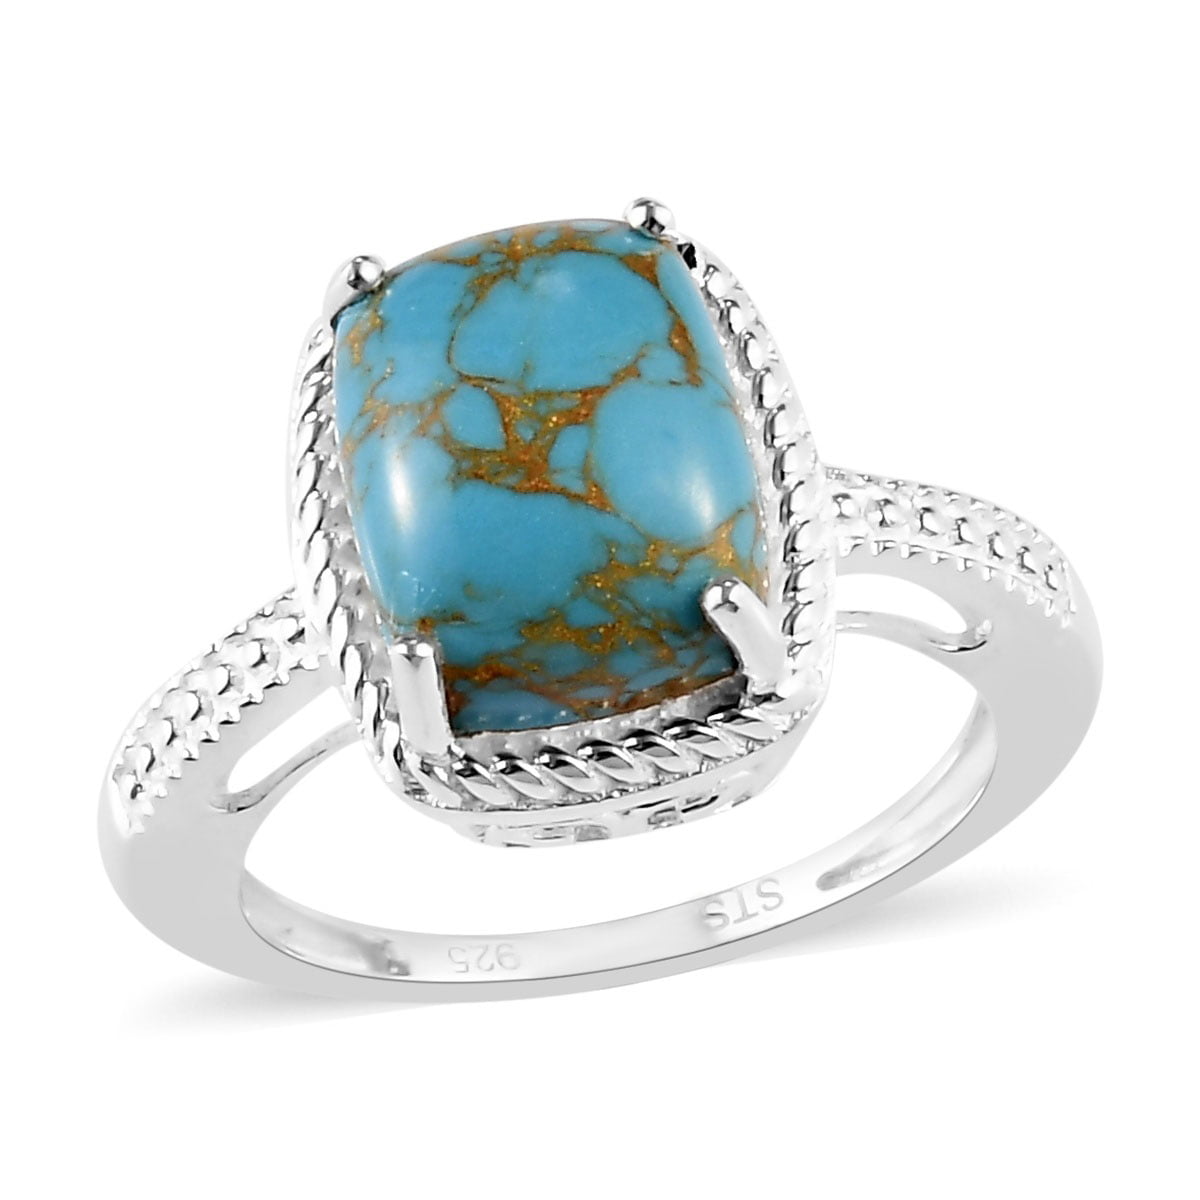 925 Sterling Silver Stone Ring For Girl Women Gift Ring Jewelery All Size L M N O P Q R S T U V W X Y Z Turquoise Ring